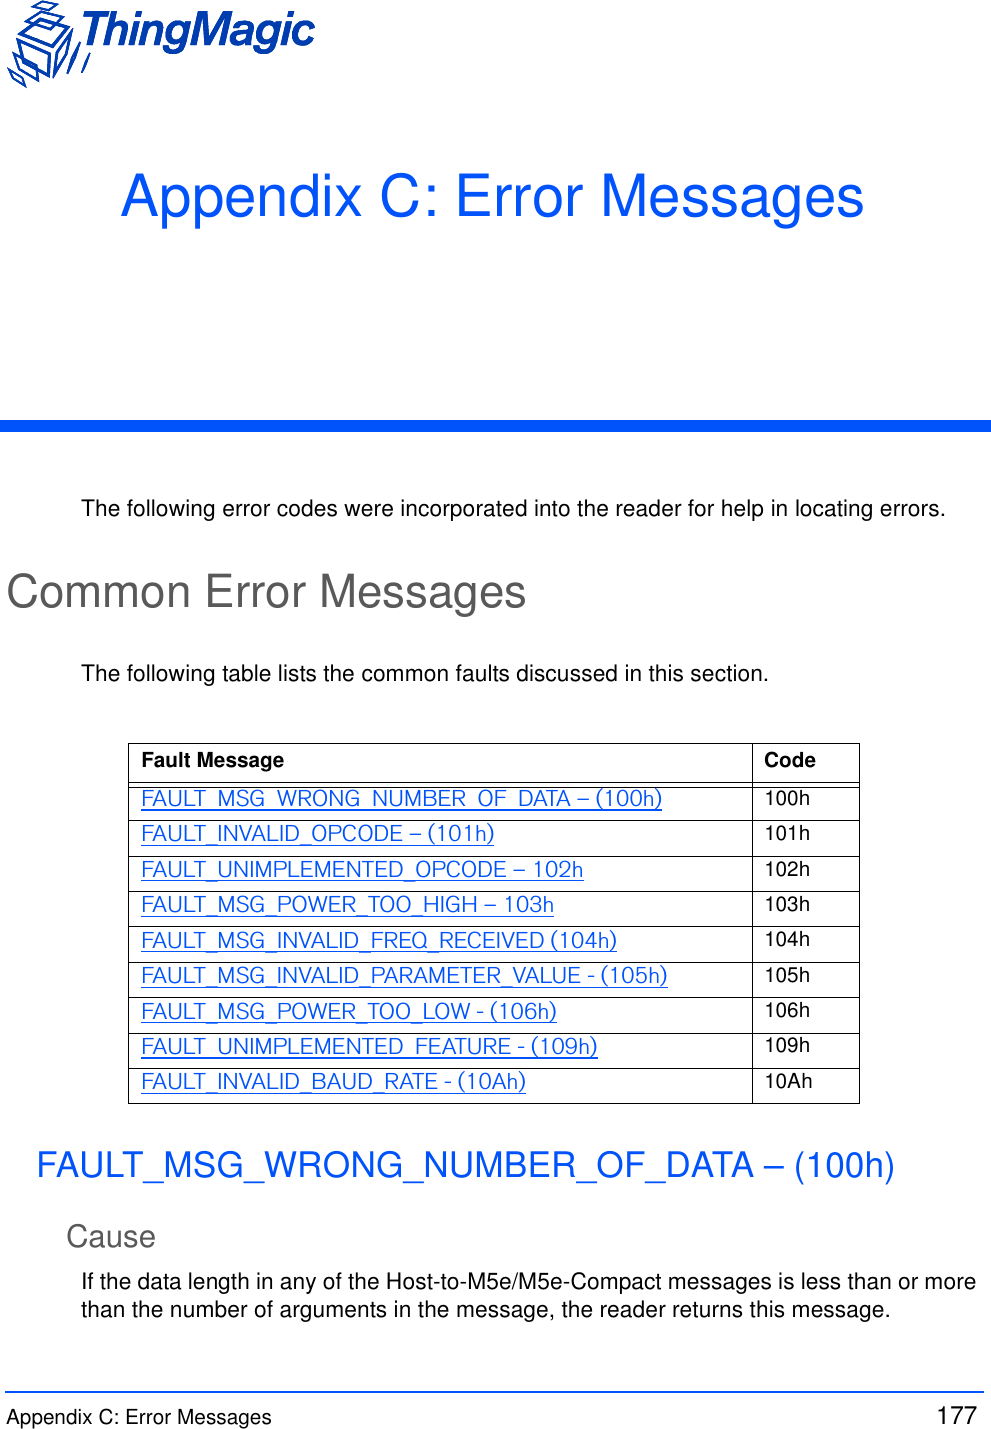 Appendix C: Error Messages  177 Appendix C: Error MessagesThe following error codes were incorporated into the reader for help in locating errors.Common Error MessagesThe following table lists the common faults discussed in this section.FAULT_MSG_WRONG_NUMBER_OF_DATA – (100h)CauseIf the data length in any of the Host-to-M5e/M5e-Compact messages is less than or more than the number of arguments in the message, the reader returns this message.Fault Message CodeFAULT_MSG_WRONG_NUMBER_OF_DATA – (100h) 100hFAULT_INVALID_OPCODE – (101h) 101hFAULT_UNIMPLEMENTED_OPCODE – 102h 102hFAULT_MSG_POWER_TOO_HIGH – 103h 103hFAULT_MSG_INVALID_FREQ_RECEIVED (104h) 104hFAULT_MSG_INVALID_PARAMETER_VALUE - (105h) 105hFAULT_MSG_POWER_TOO_LOW - (106h) 106hFAULT_UNIMPLEMENTED_FEATURE - (109h) 109hFAULT_INVALID_BAUD_RATE - (10Ah) 10Ah